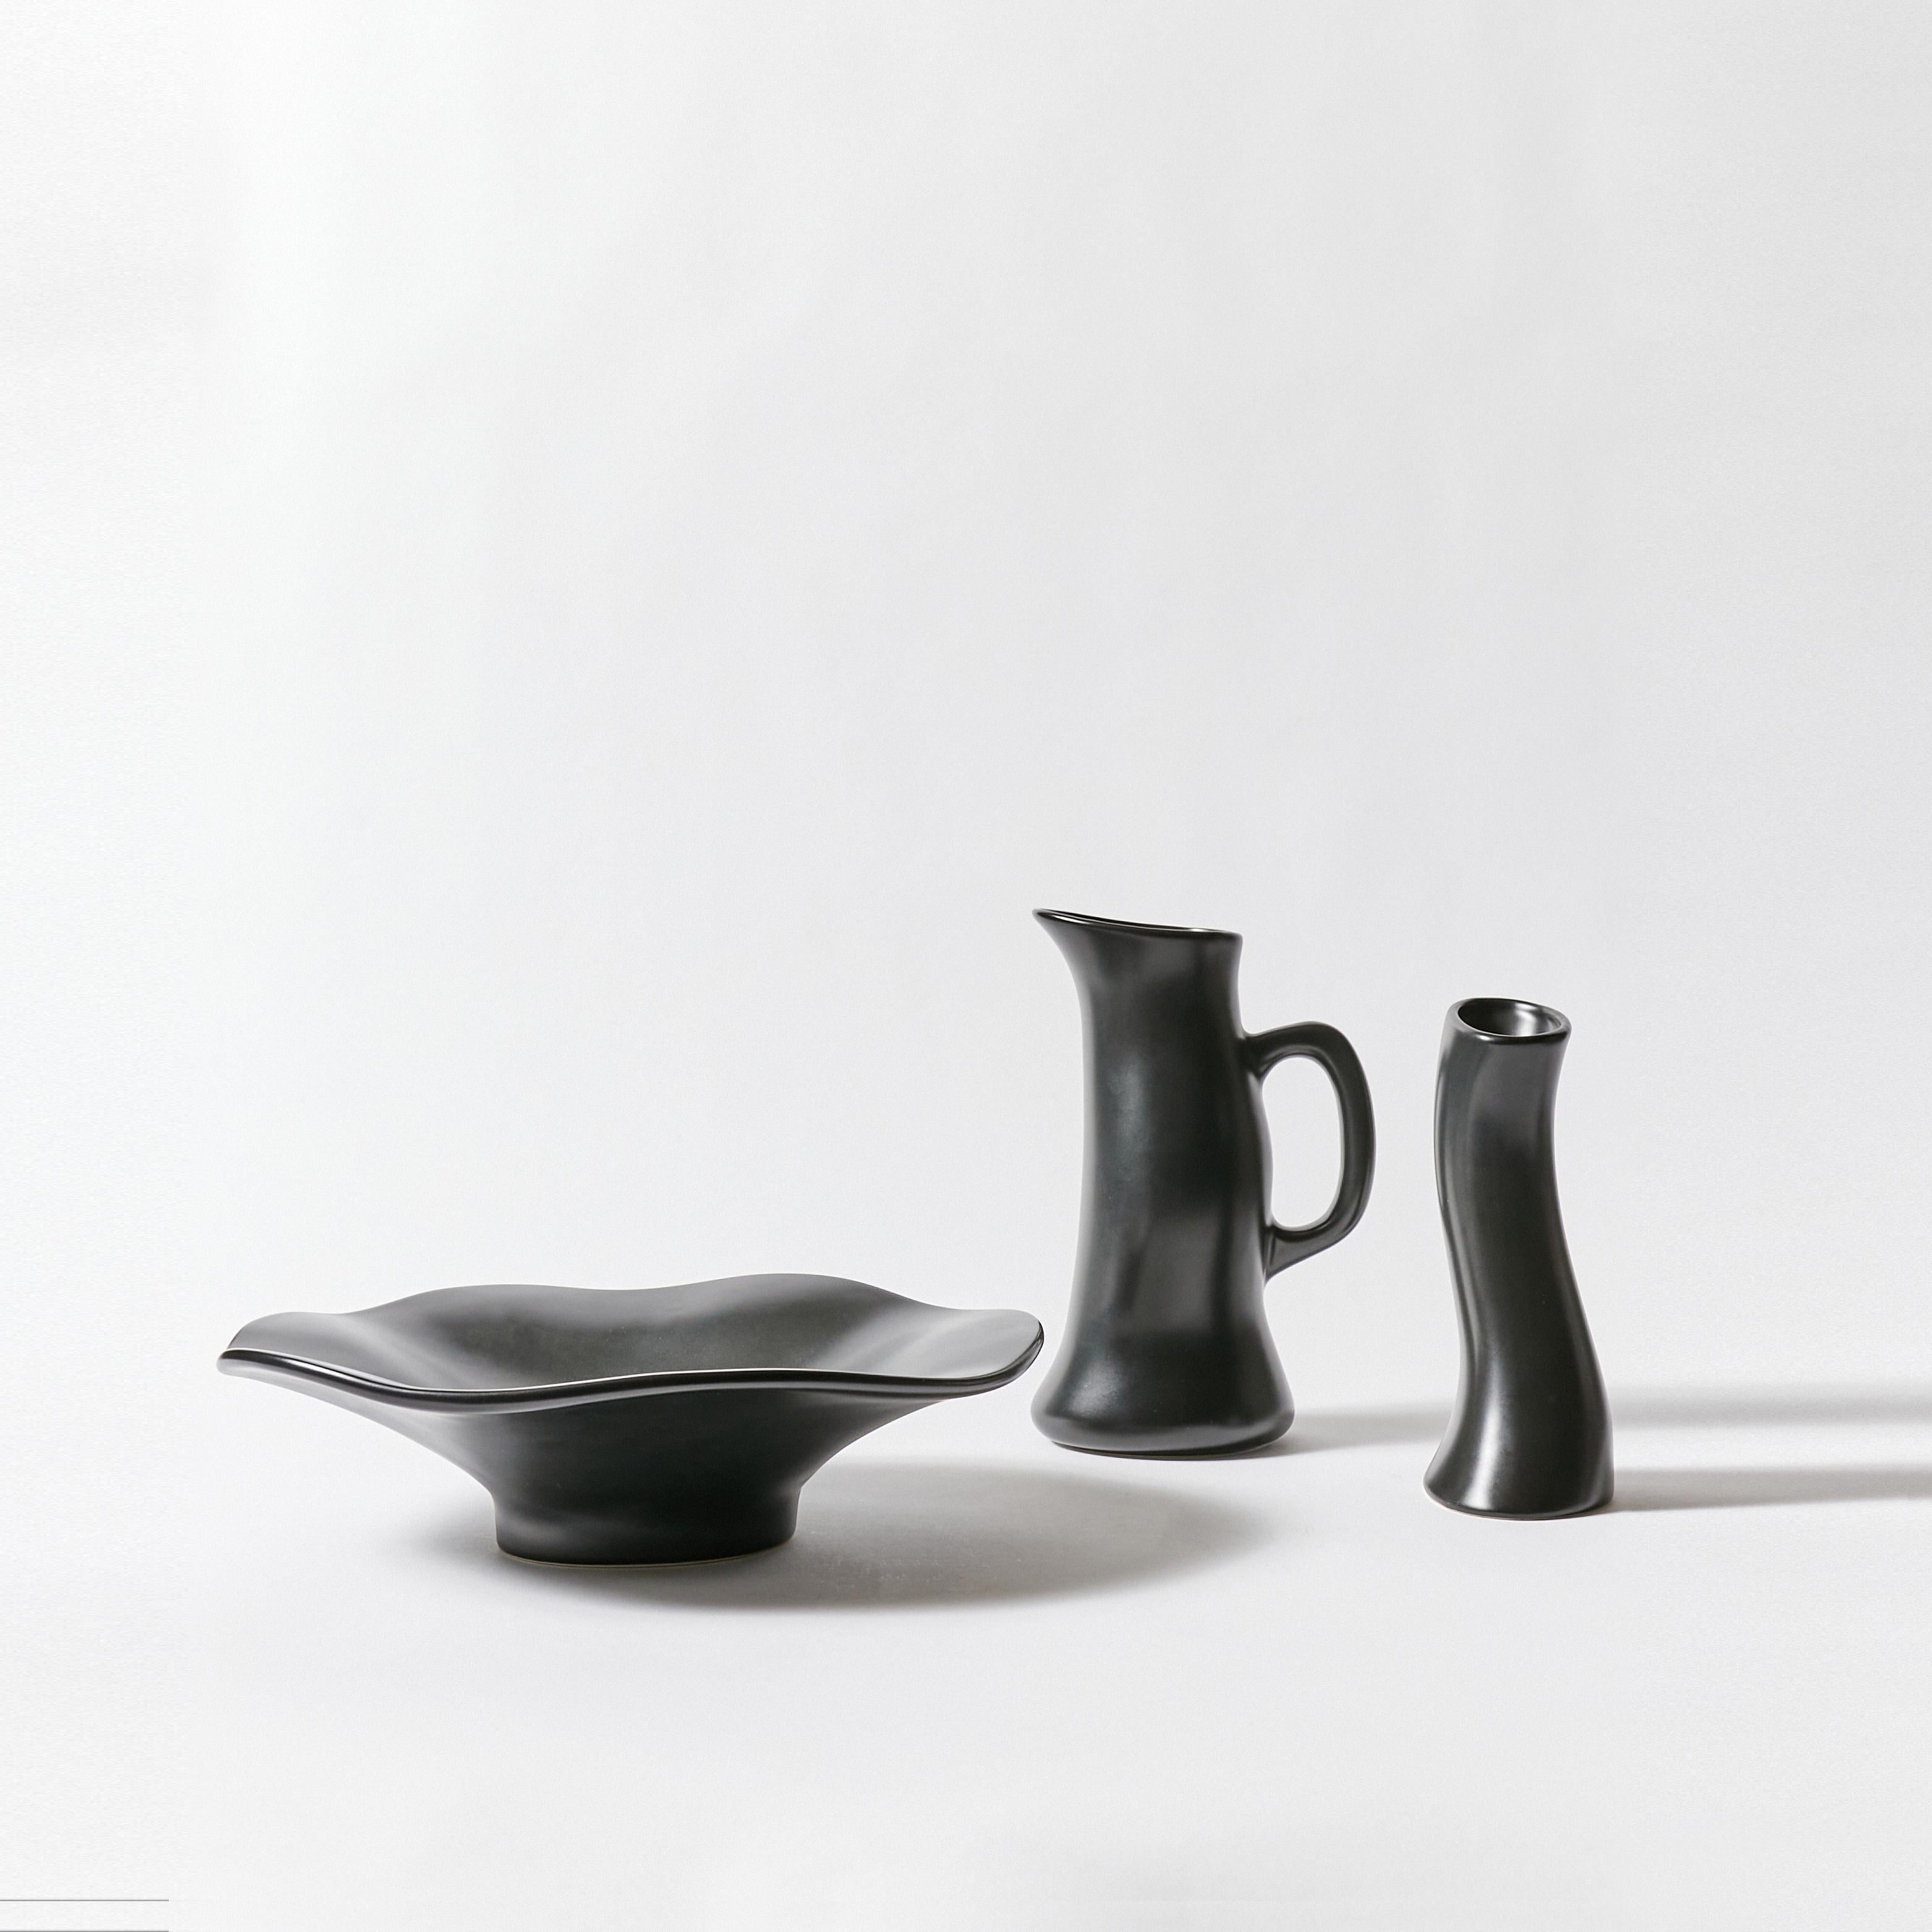 Set of ceramic fruit bowl, pitcher and tall vase designed by Robert Welch. All three pieces show a free form/organic shape and they are finished in black satin glaze. Signature stamp on bottom.

Pitcher
Height 9 in/ 22.86 cm
Width 4.5 In / 11.43